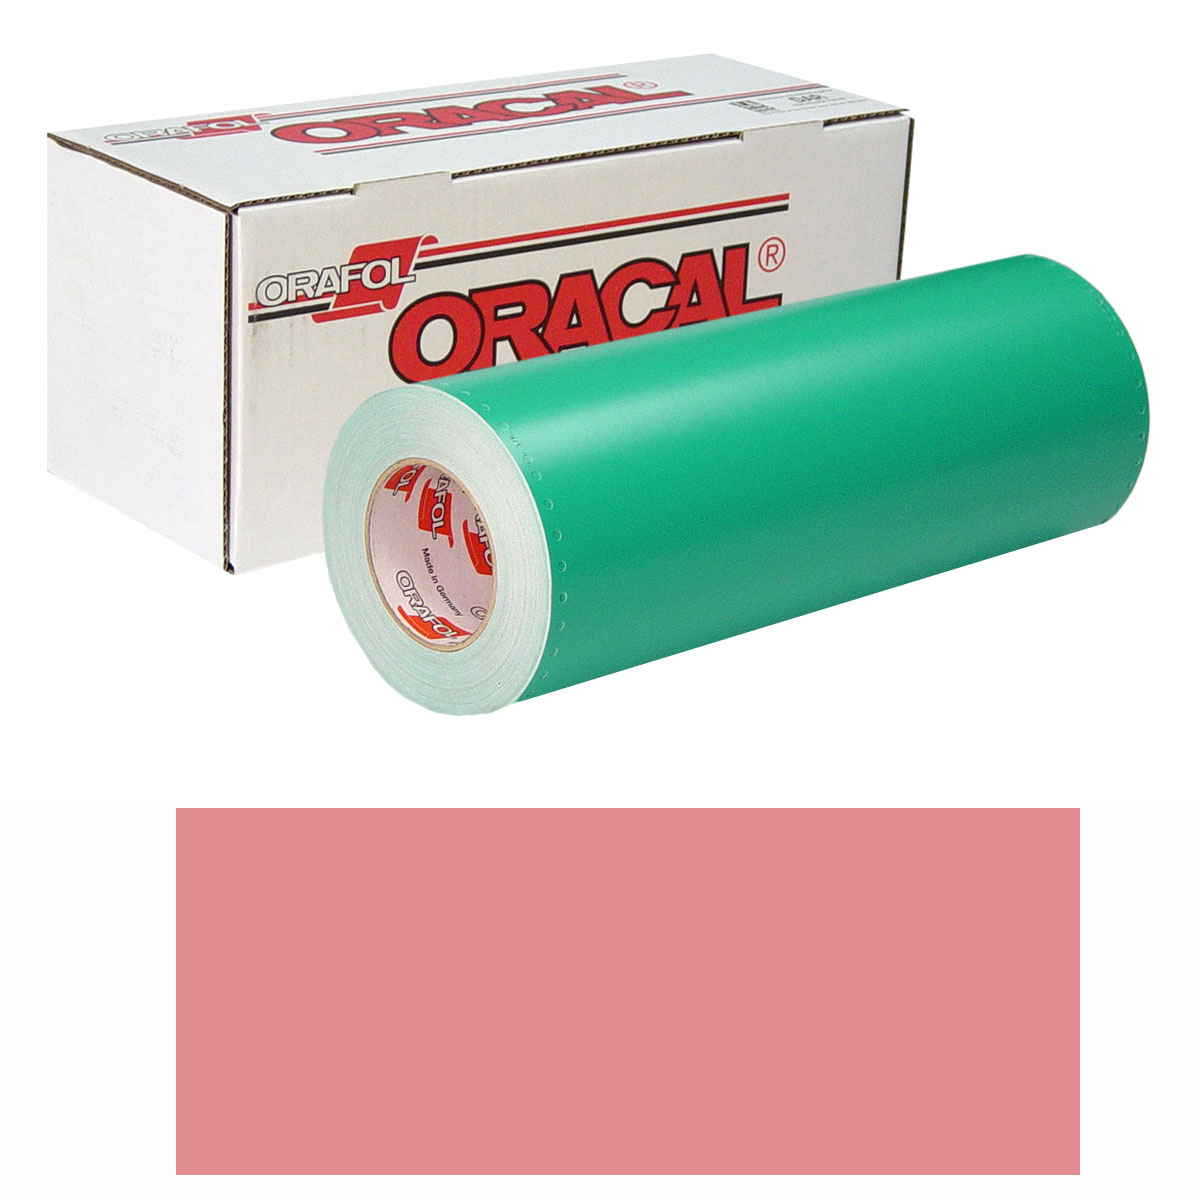 ORACAL 8500 30in X 10yd 085 Pale Pink